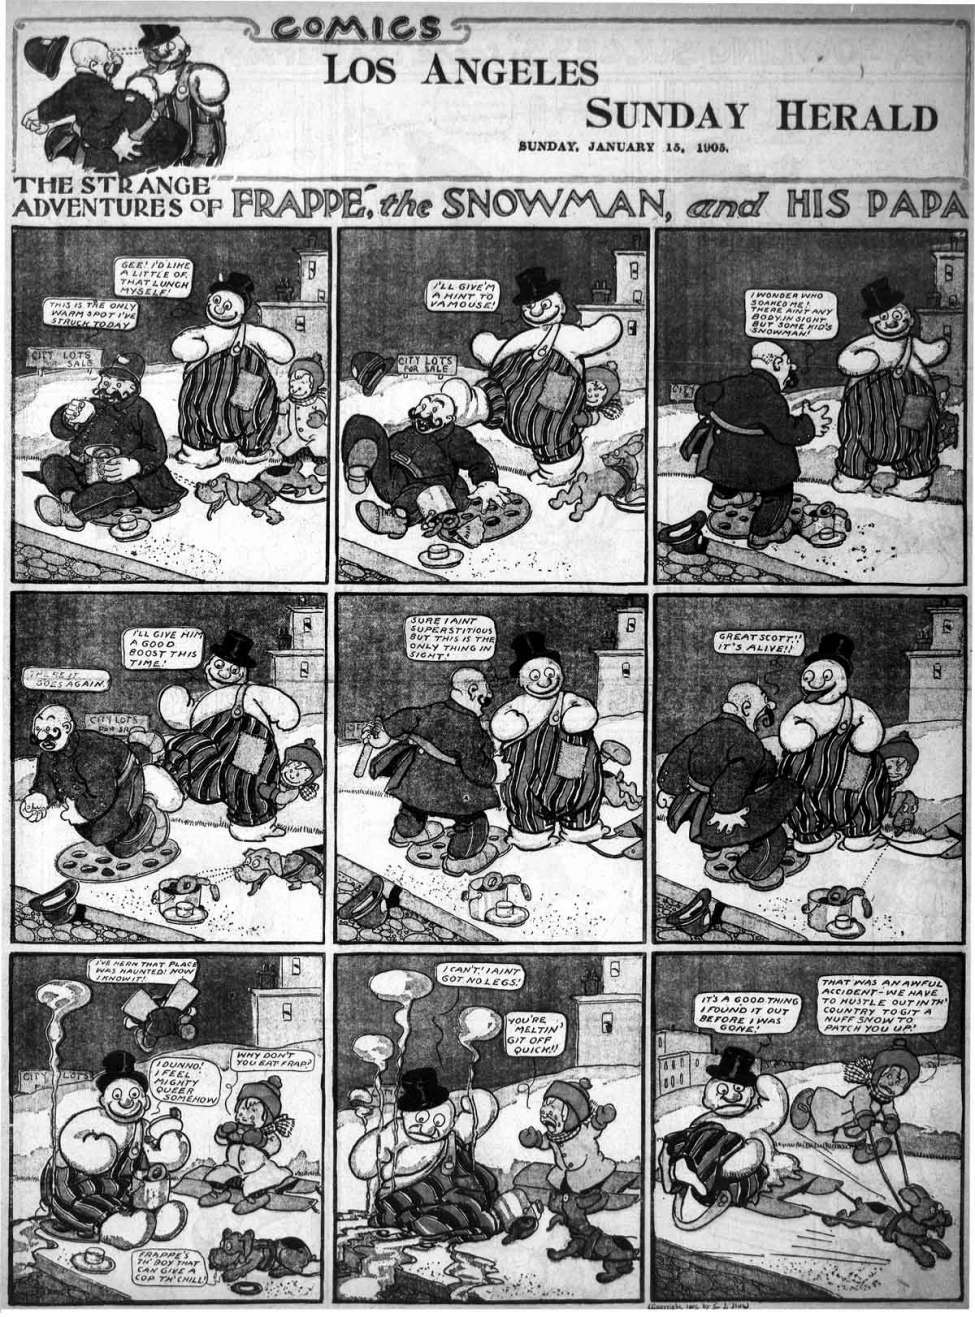 Book Cover For The Strange Adventures of Frappe the Snowman and His Papa